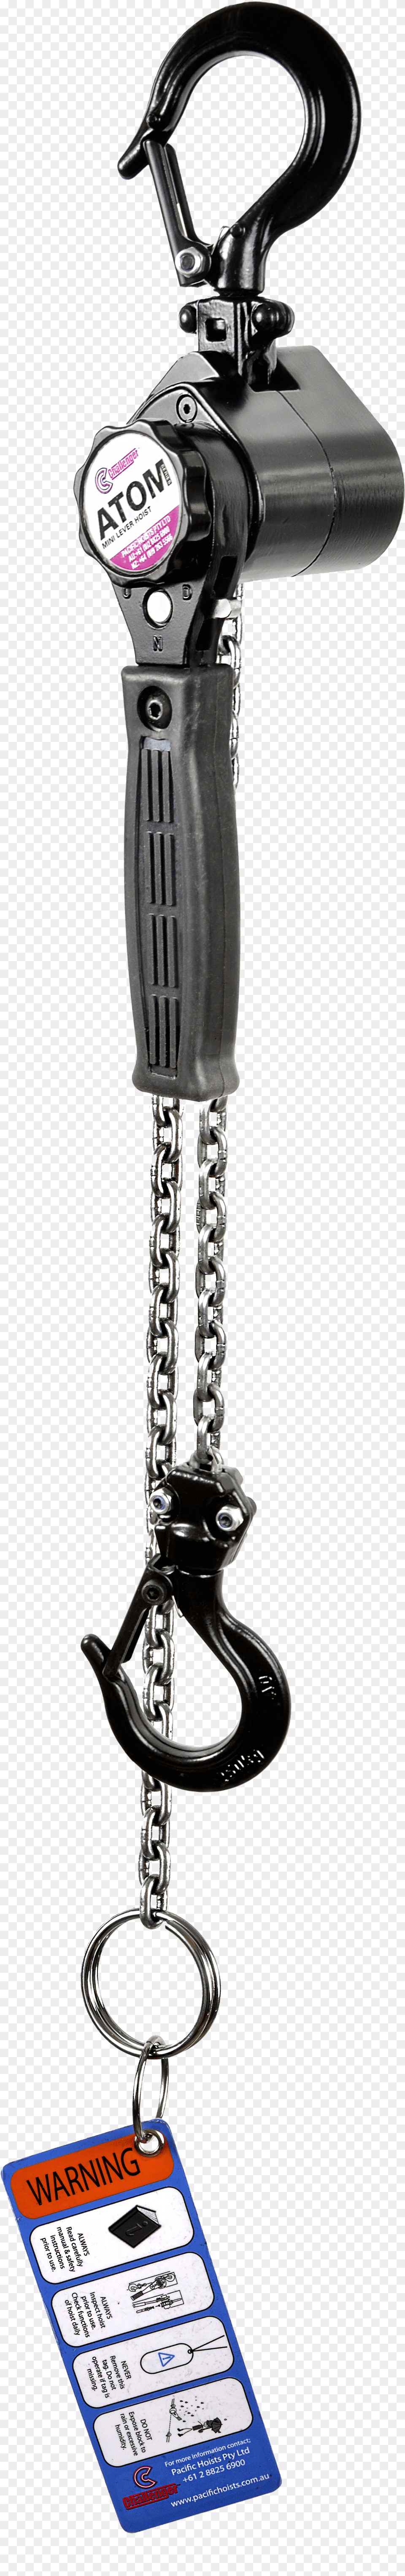 Chain, Light, Logo Png Image